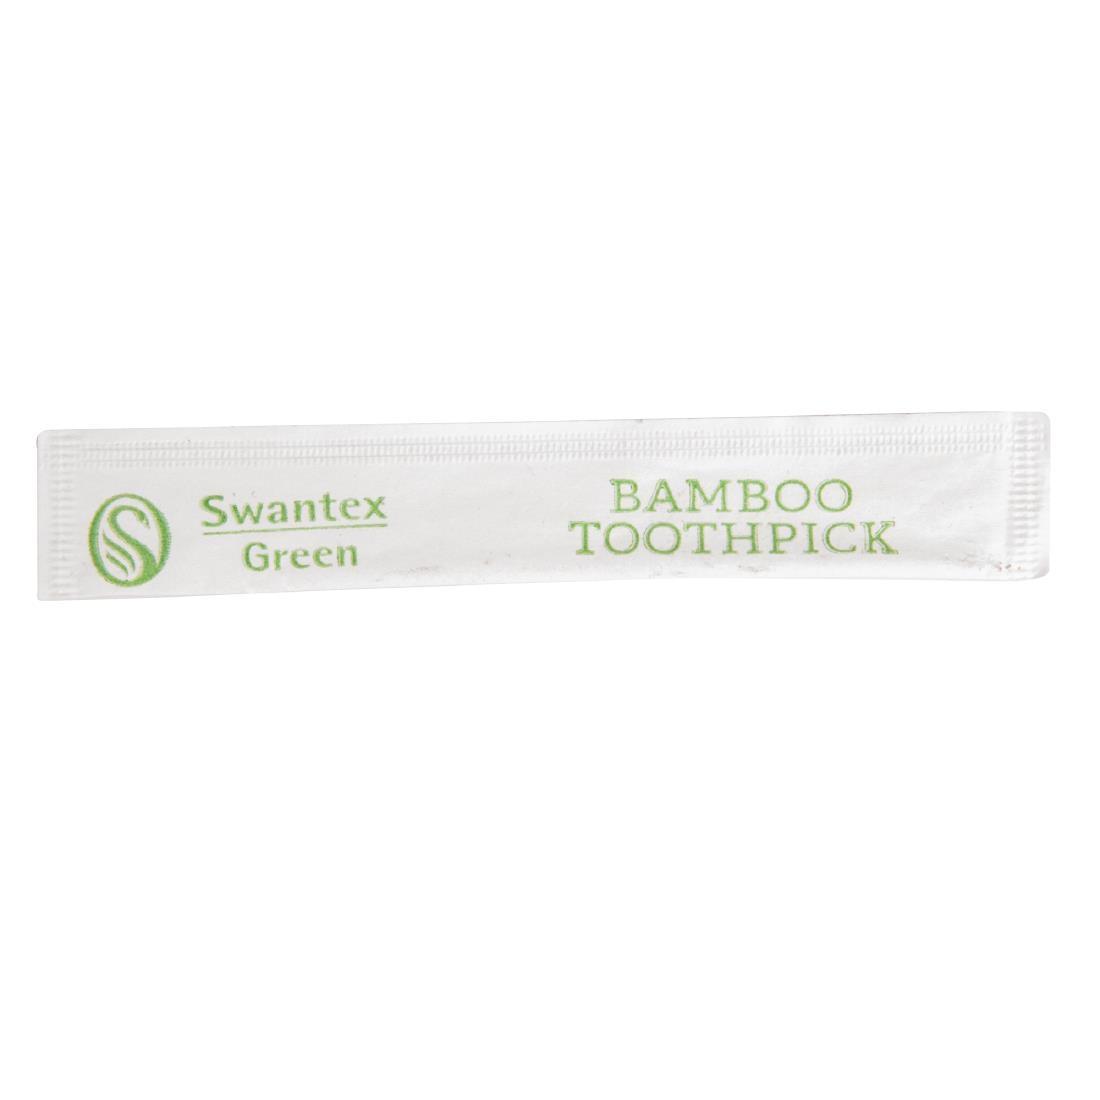 Individually Wrapped Biodegradable Bamboo Toothpicks (Pack of 1000) - DA015  - 3